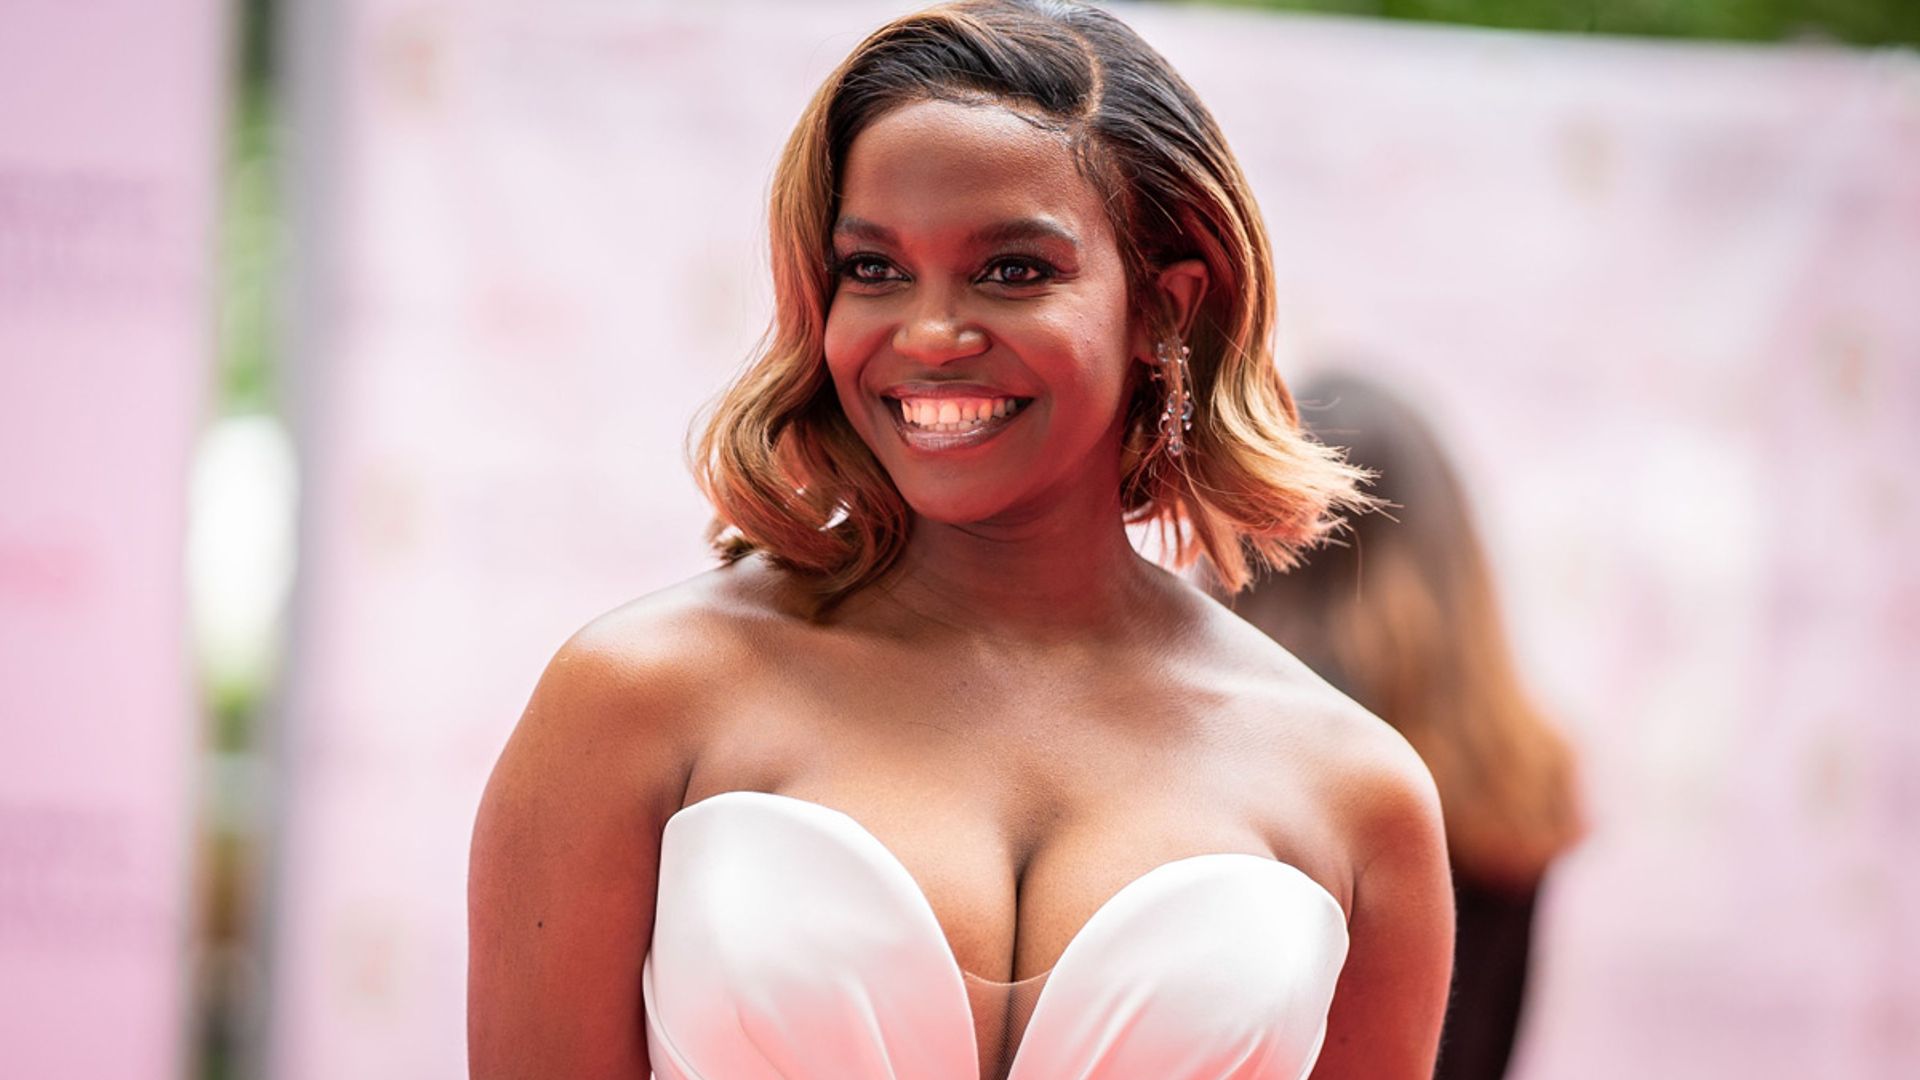 Strictly star Oti Mabuse's heart 'filled with joy' as she celebrates happy news